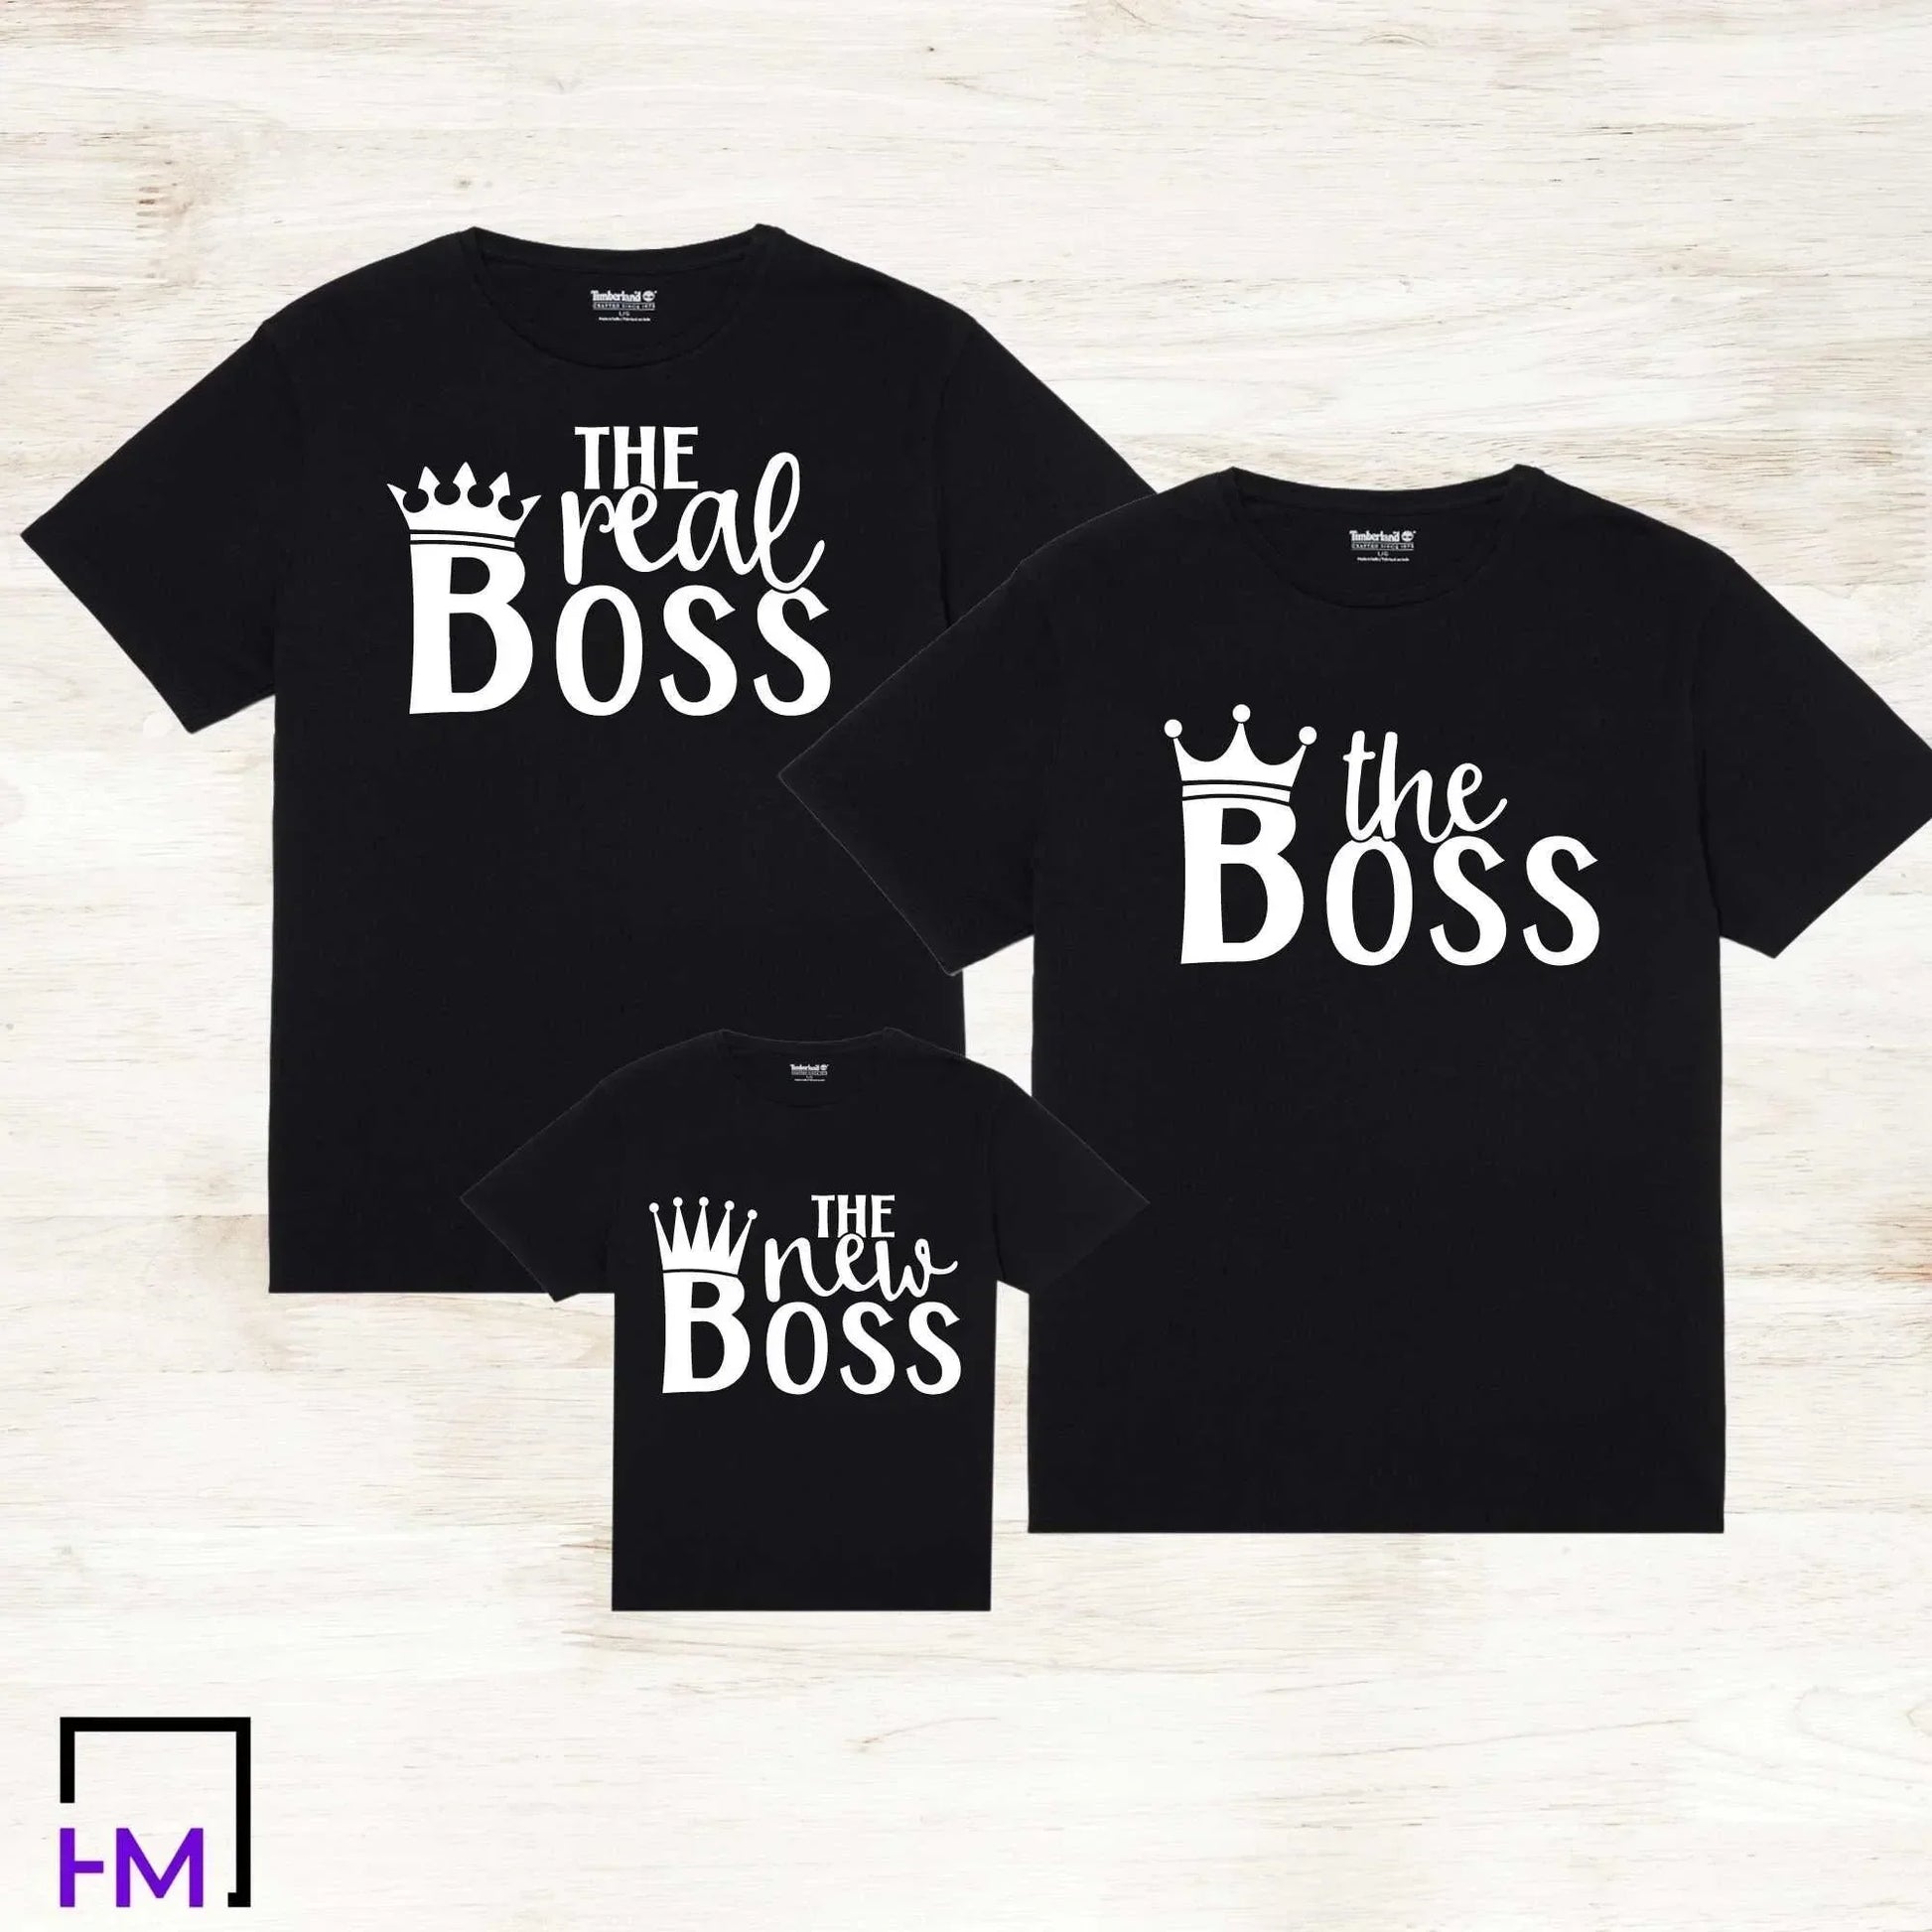 The Boss, The Real Boss, The New Boss Family Matching Shirts 👔